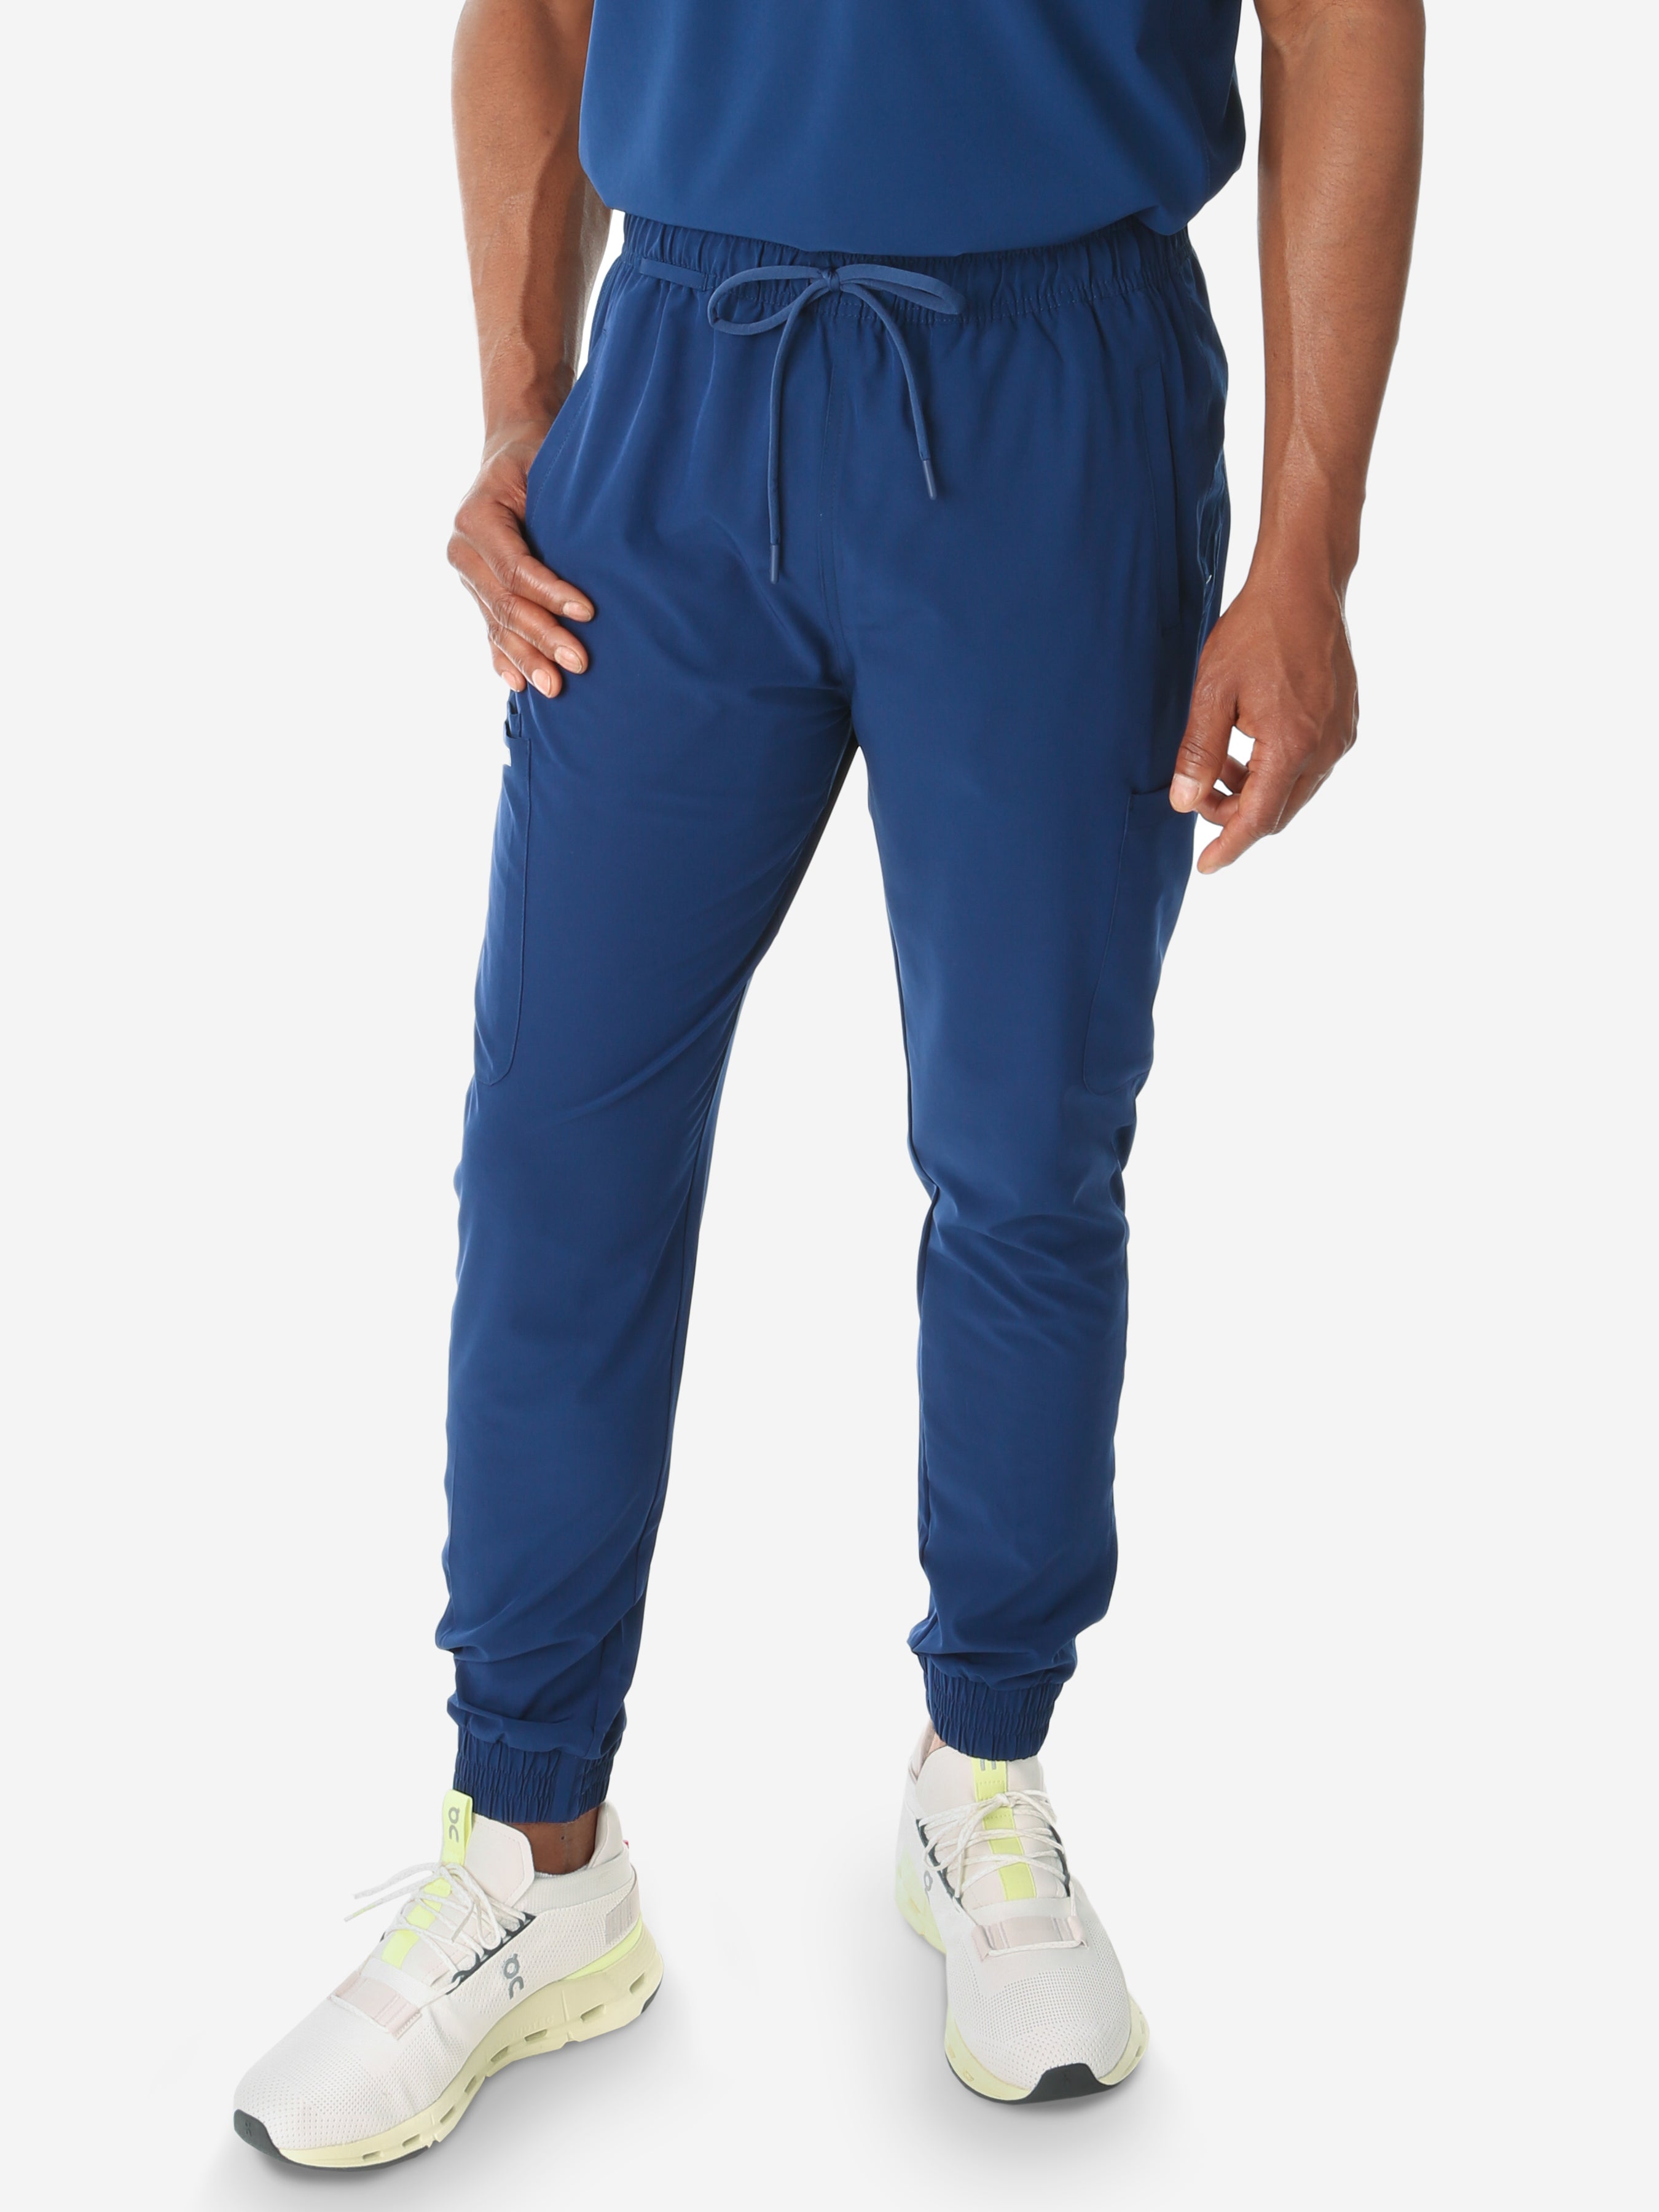 YOURS Plus Size Navy Blue Cuffed Stretch Joggers